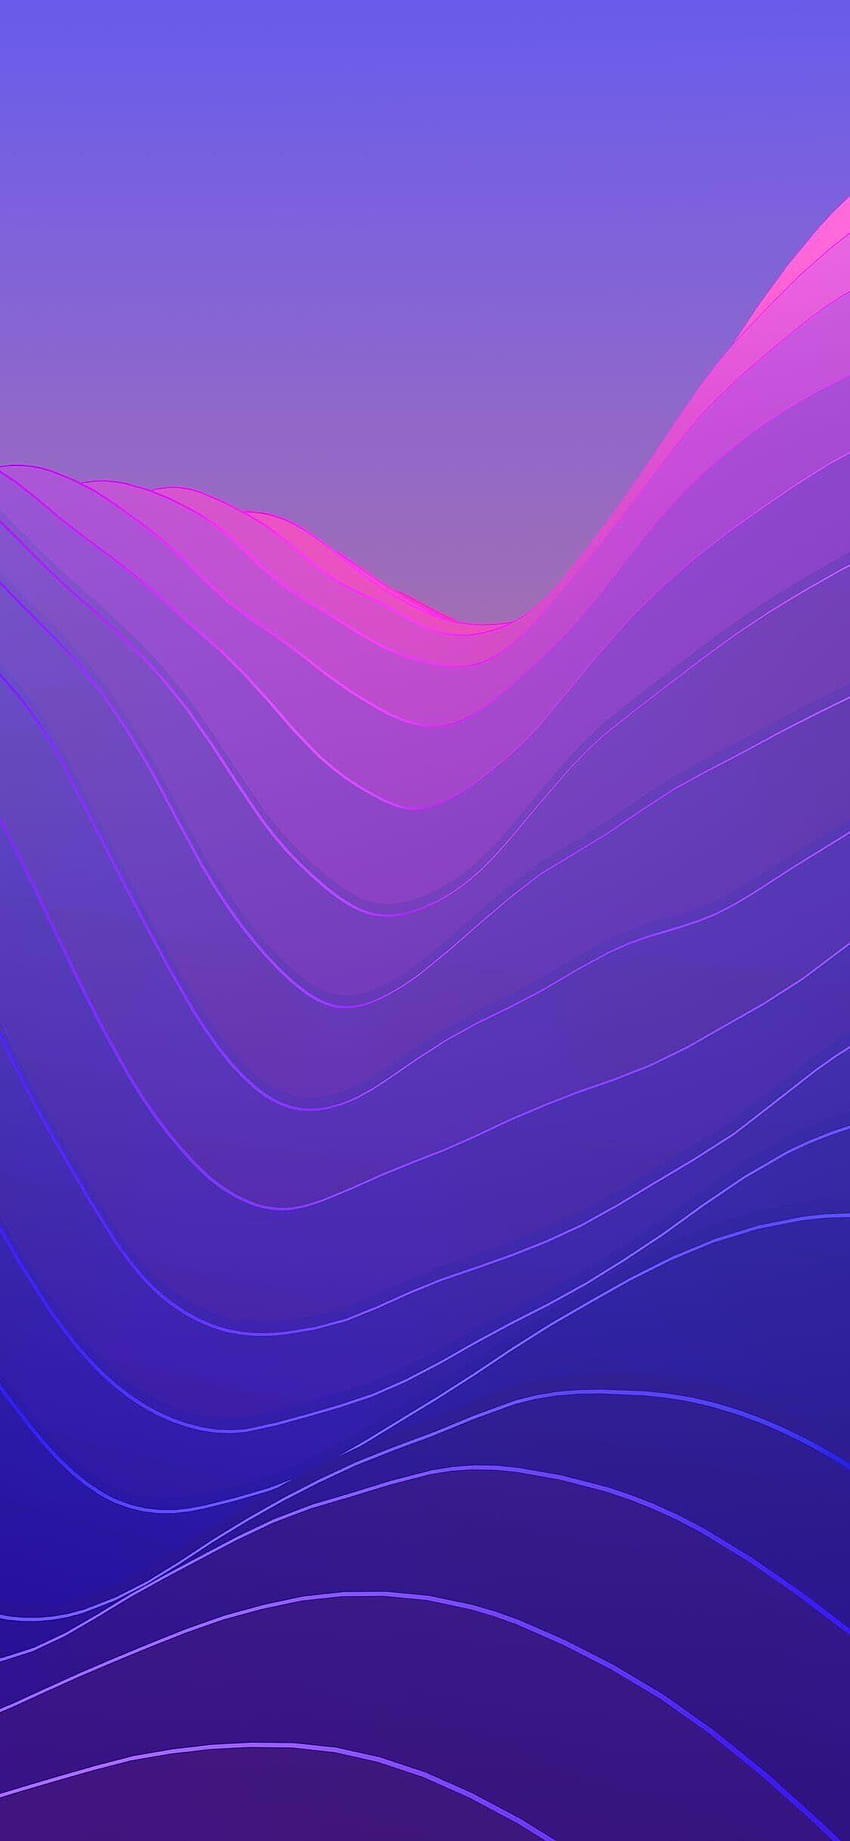 Ios 11, Iphone X, Purple, Blue, Clean, Simple, Abstract, iphone 11 and iphone x HD phone wallpaper